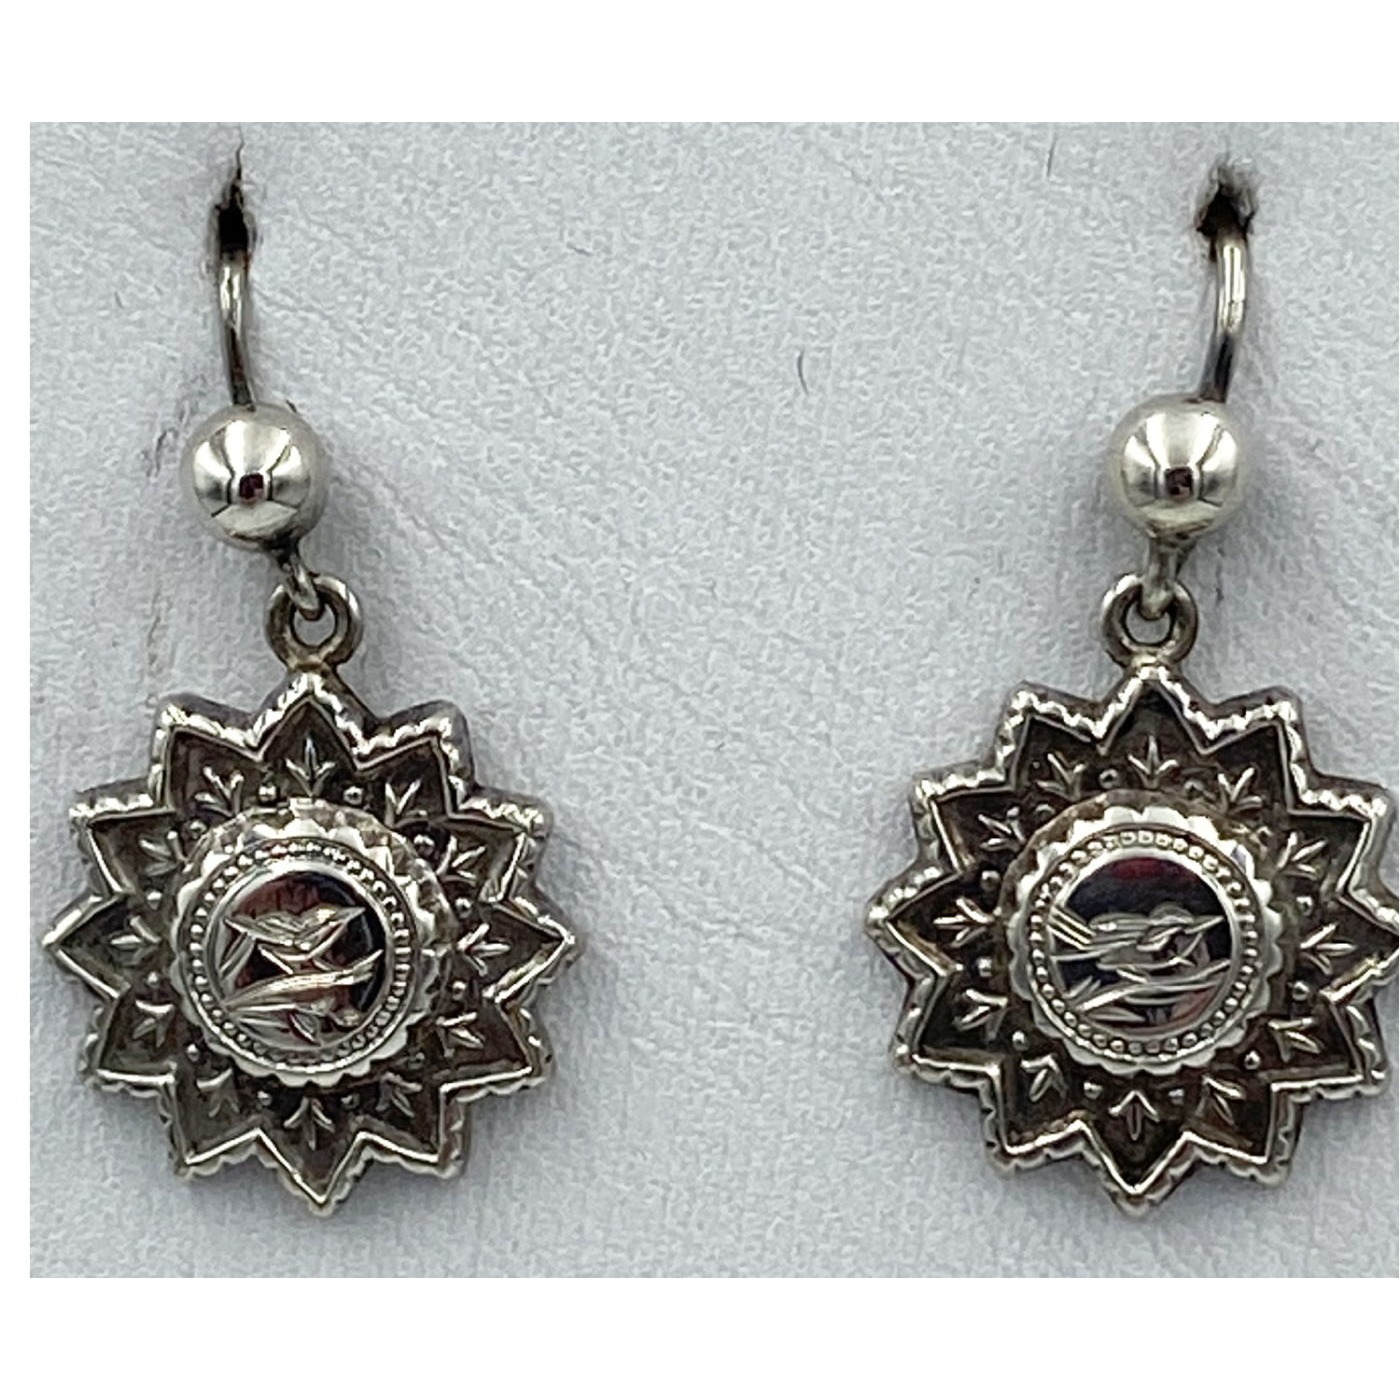 Stunning Star-shaped Sterling Silver English Victorian Earrings - Birds - Swallows